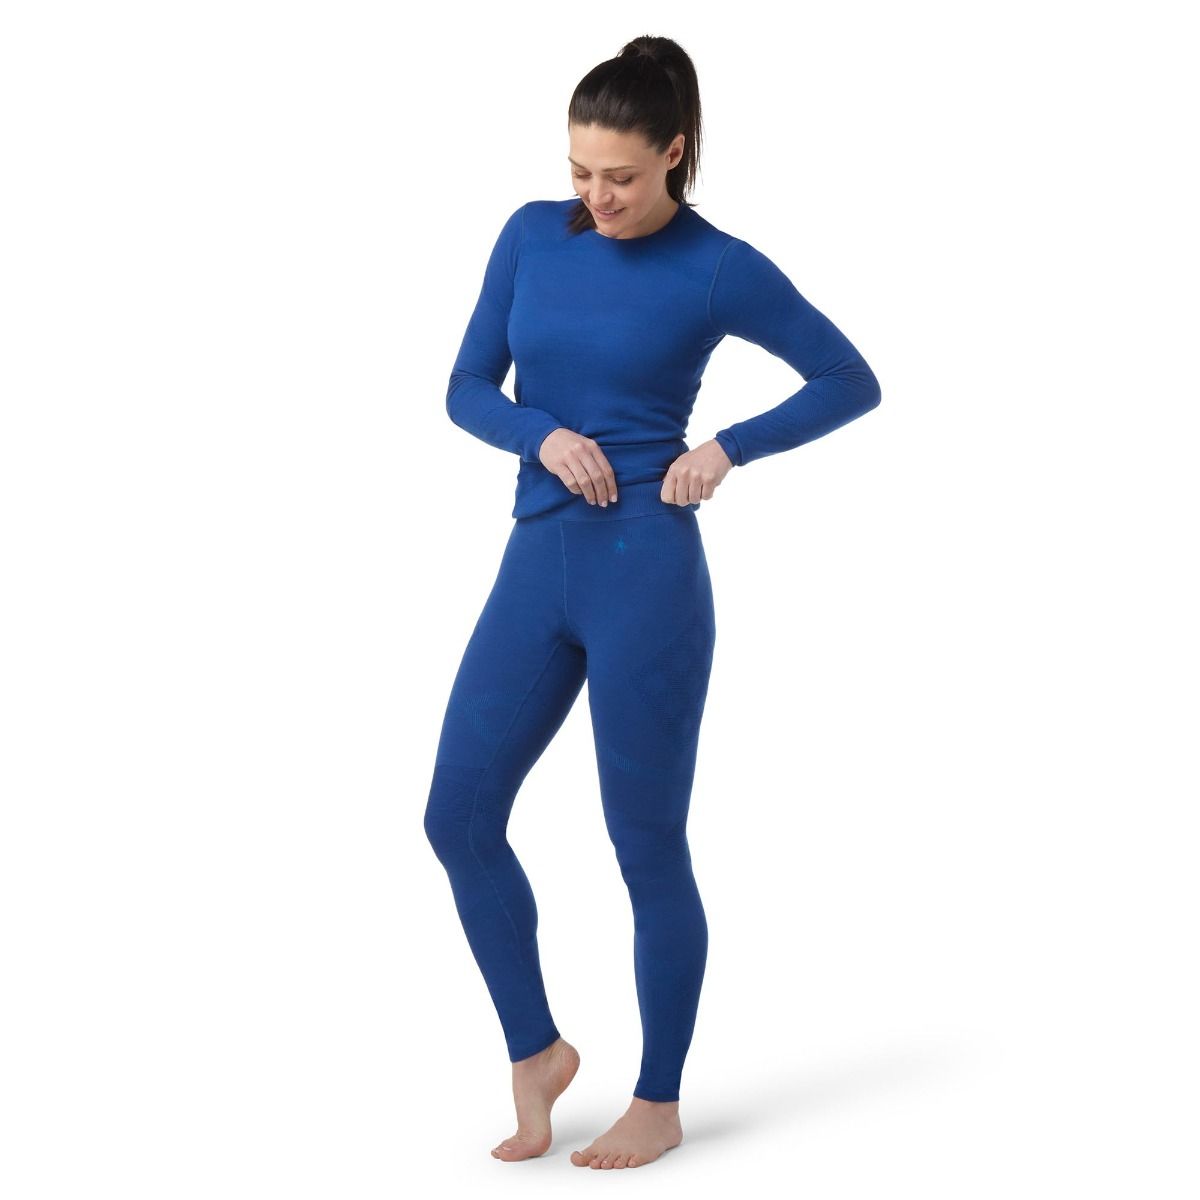 SIORO Dralon Heattech Thermal Underwear for Women Stretchy